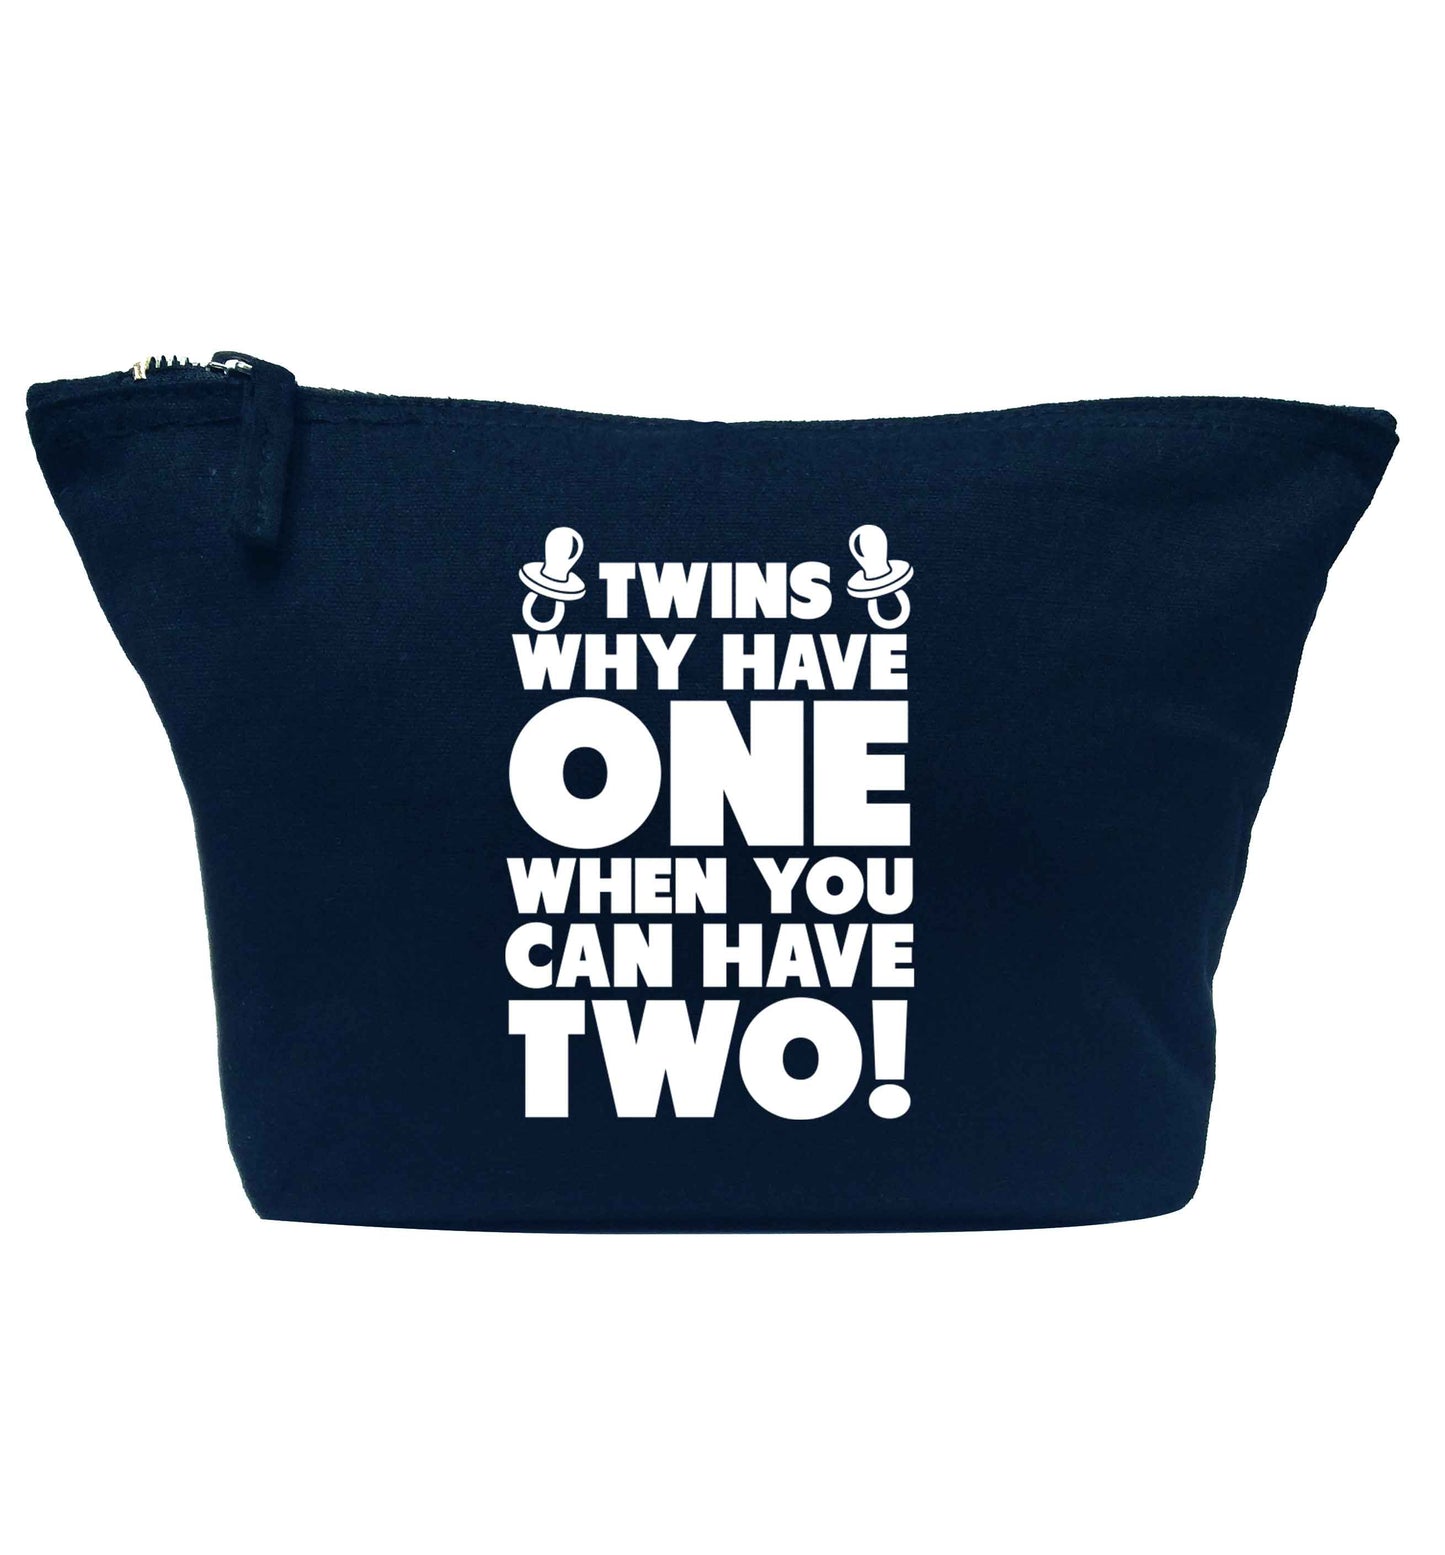 Twins why have one when you can have two navy makeup bag